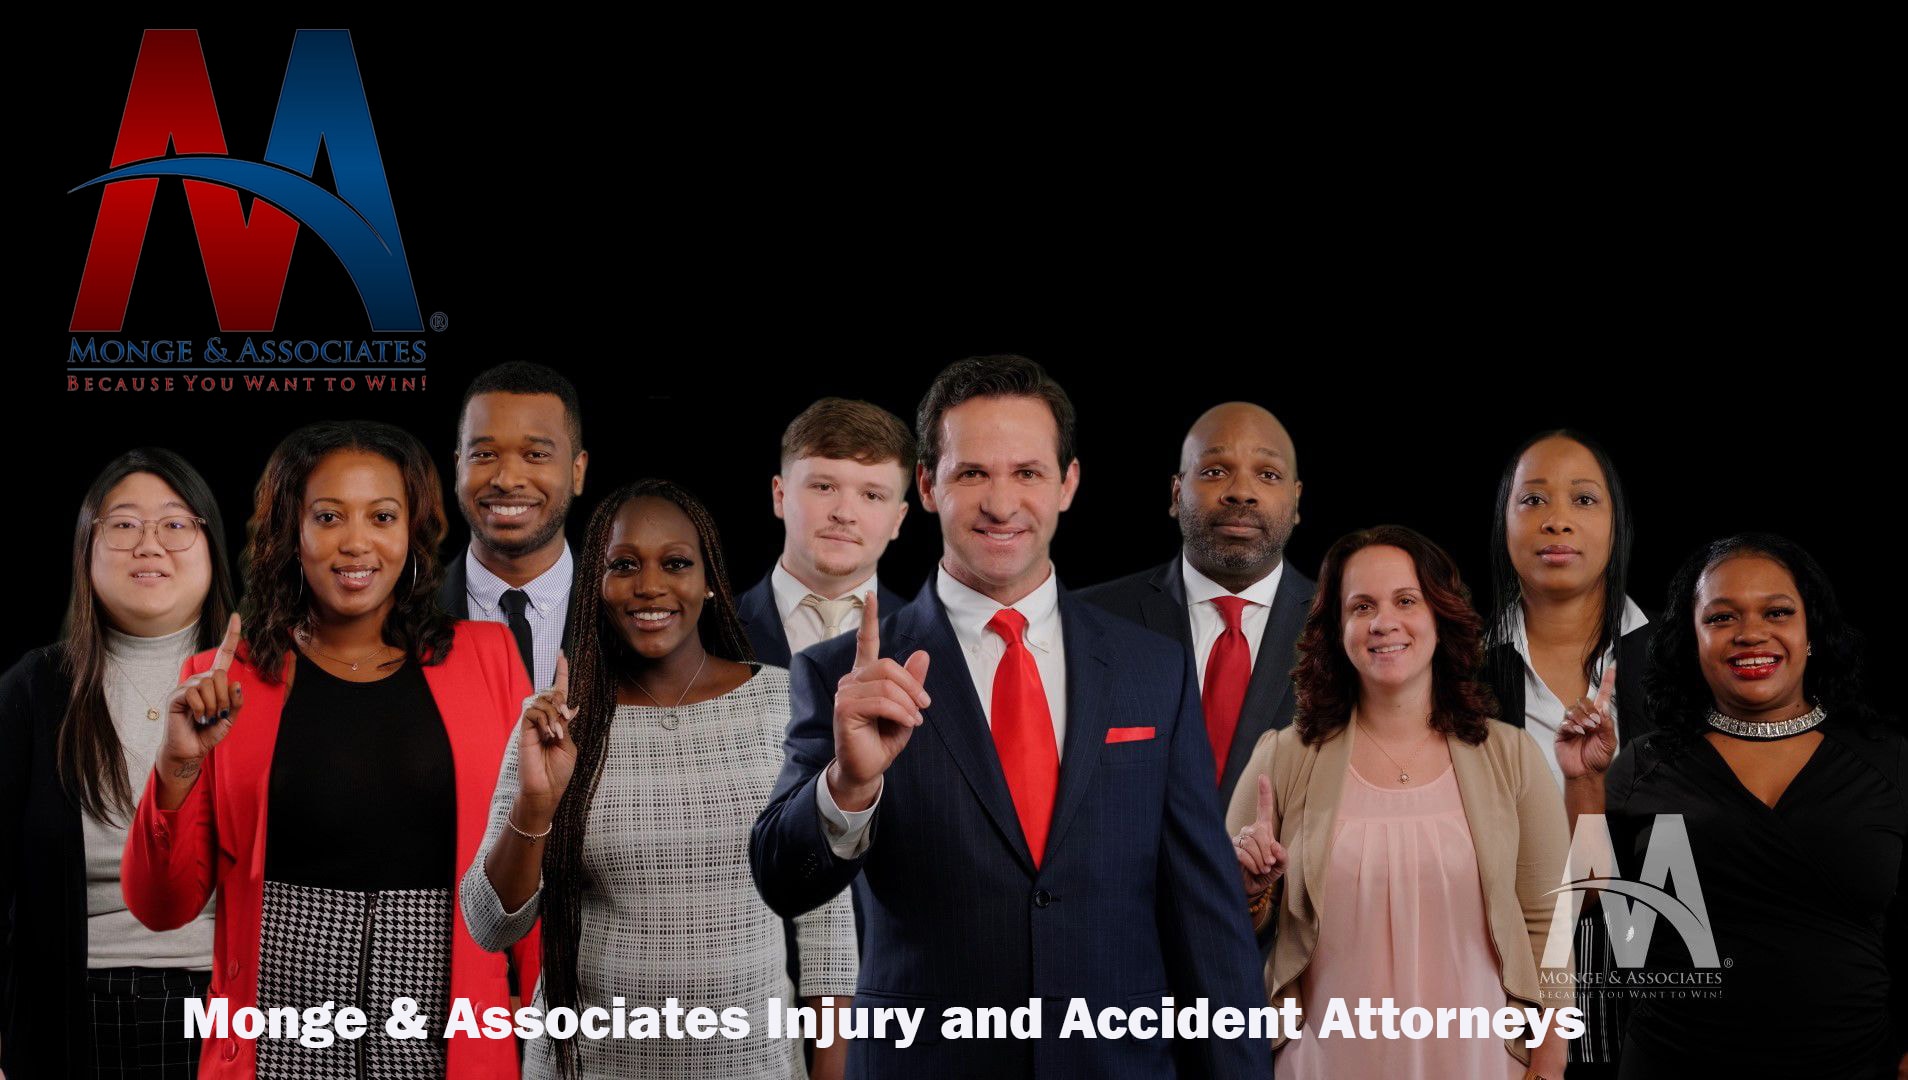 Monge & Associates Injury and Accident Attorneys - Cleveland (OH 44114), US, lawyers car accidents